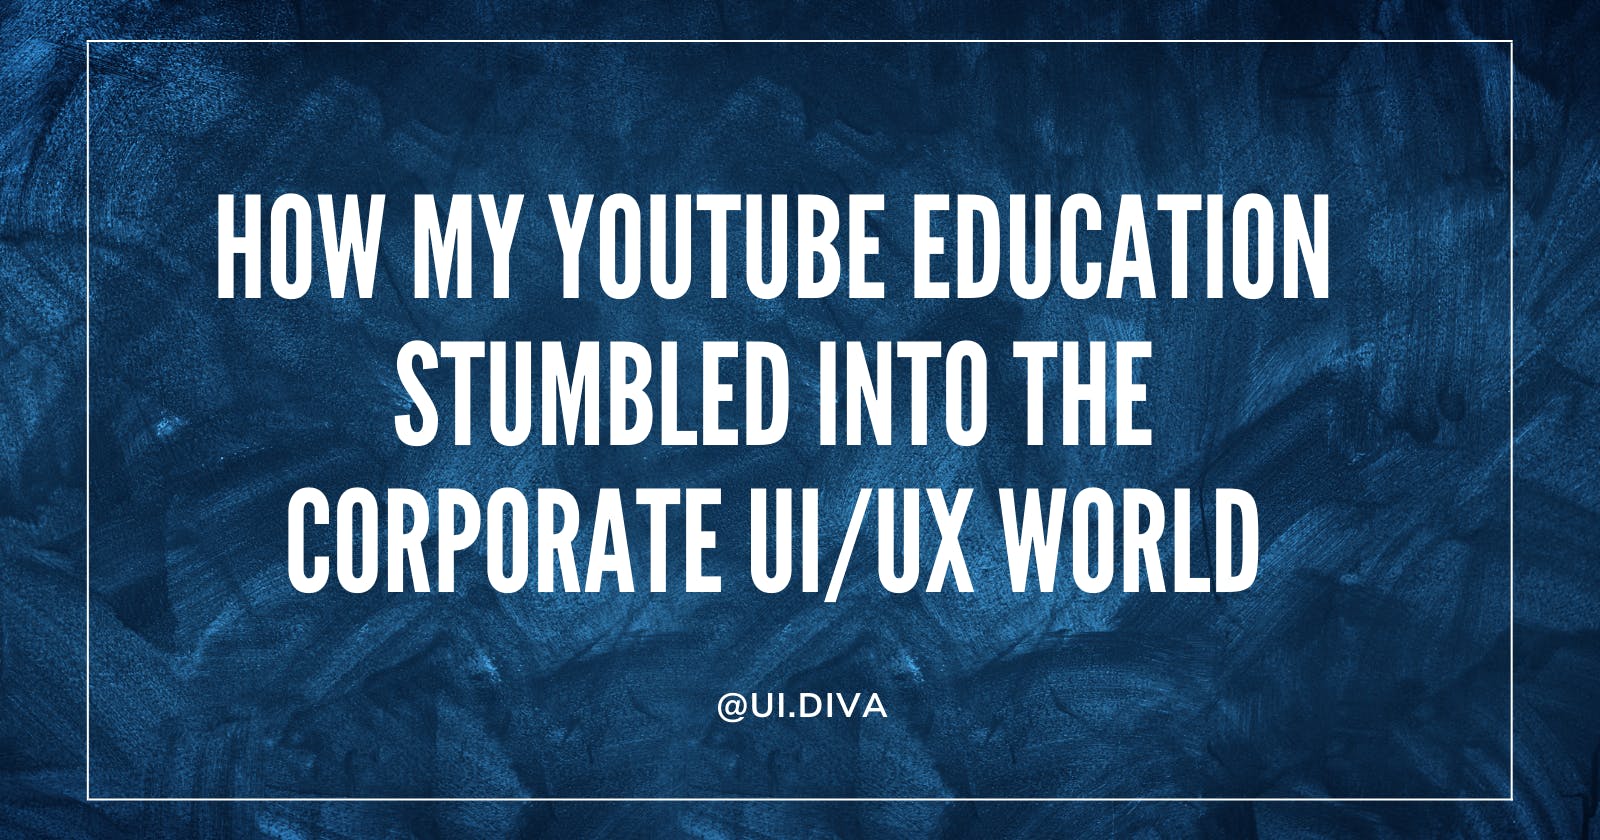 How My YouTube Education Stumbled Into The Corporate UI/UX World